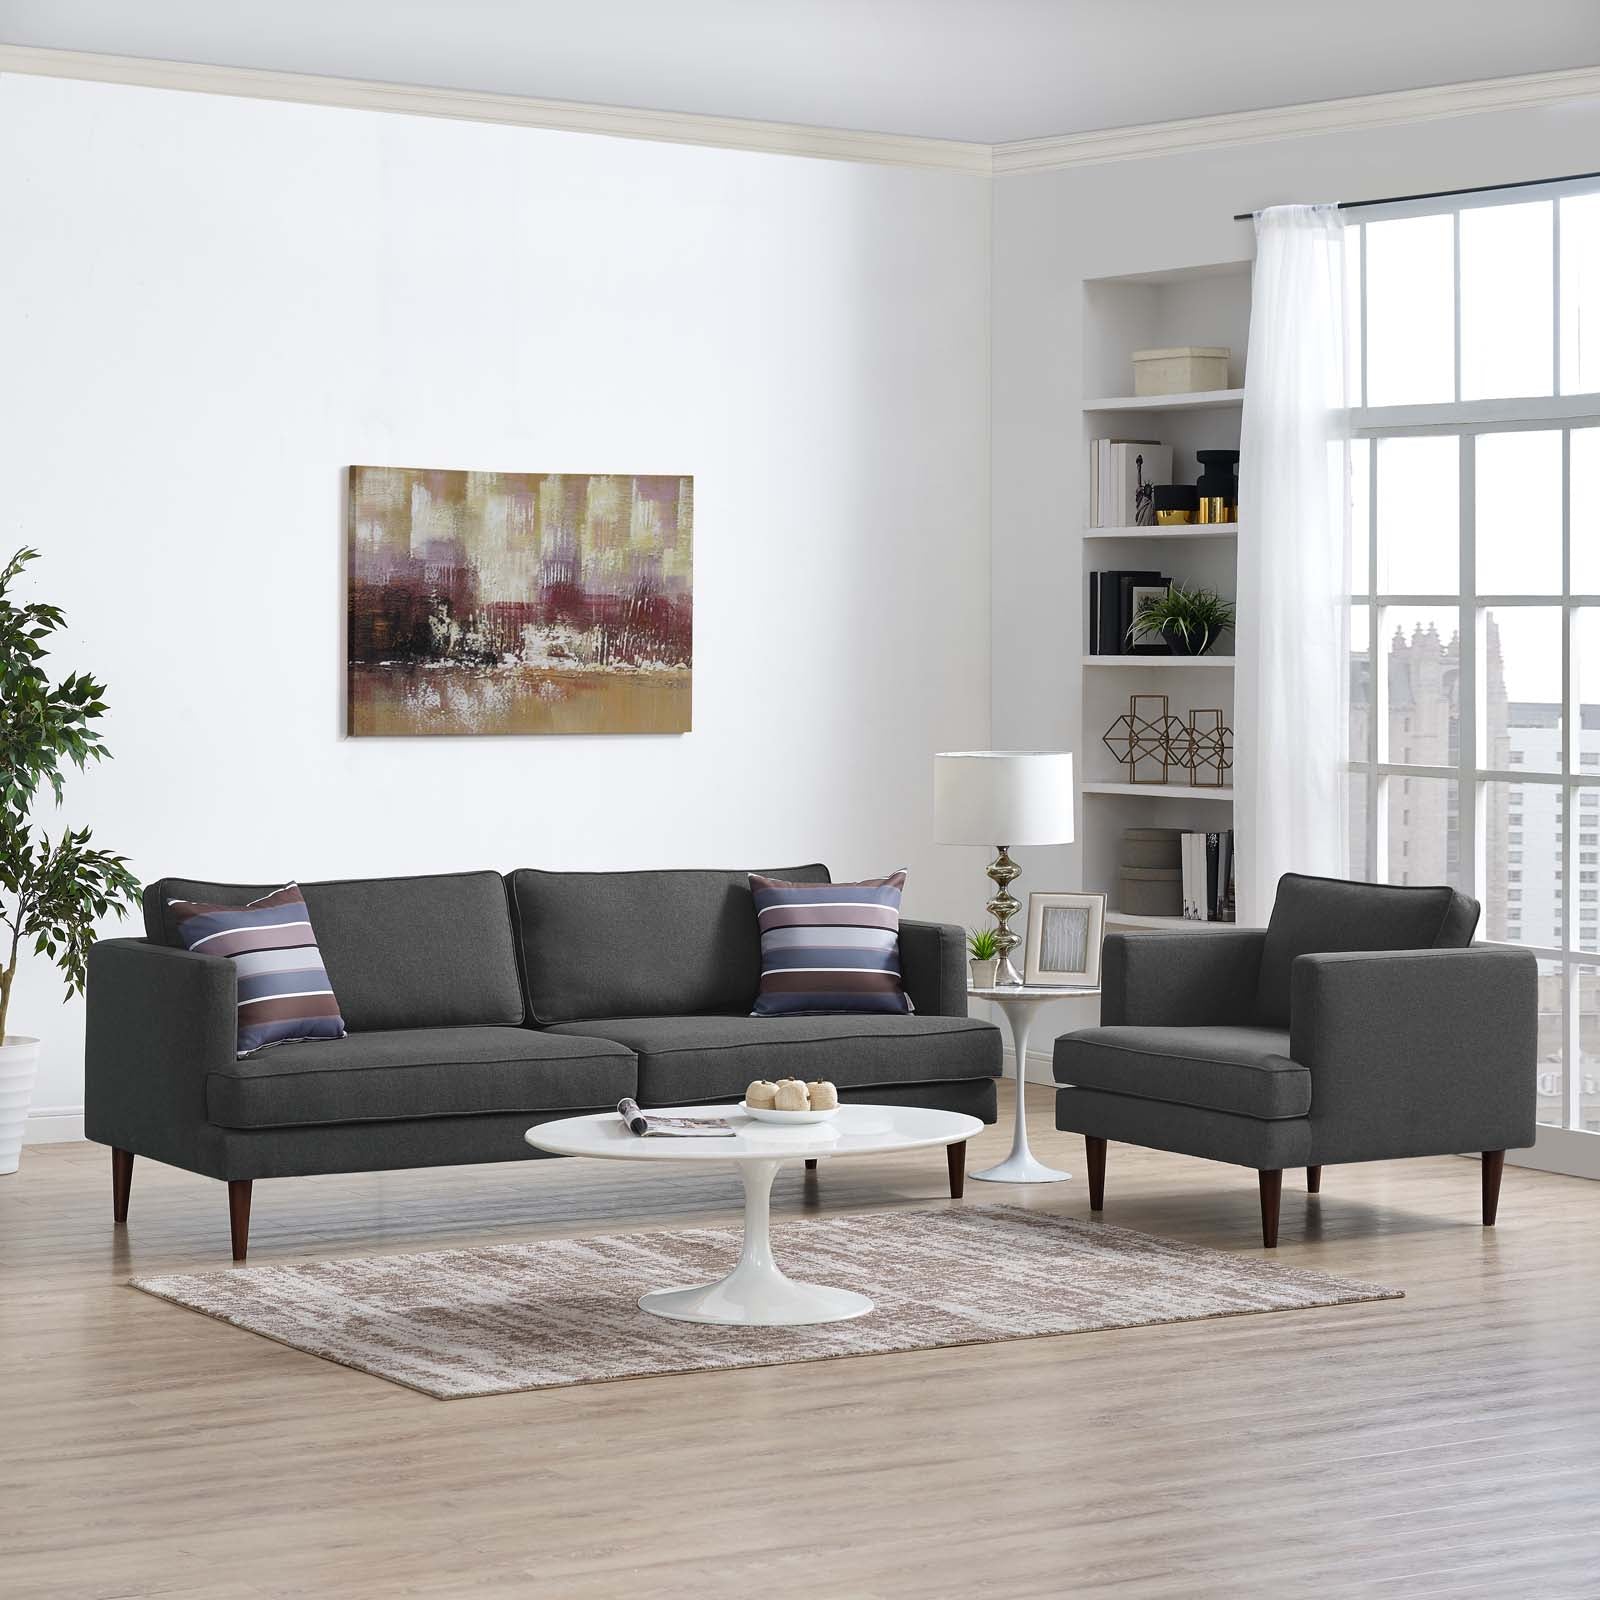 Modway Living Room Sets - Agile Upholstered Fabric Sofa and Armchair Set Gray